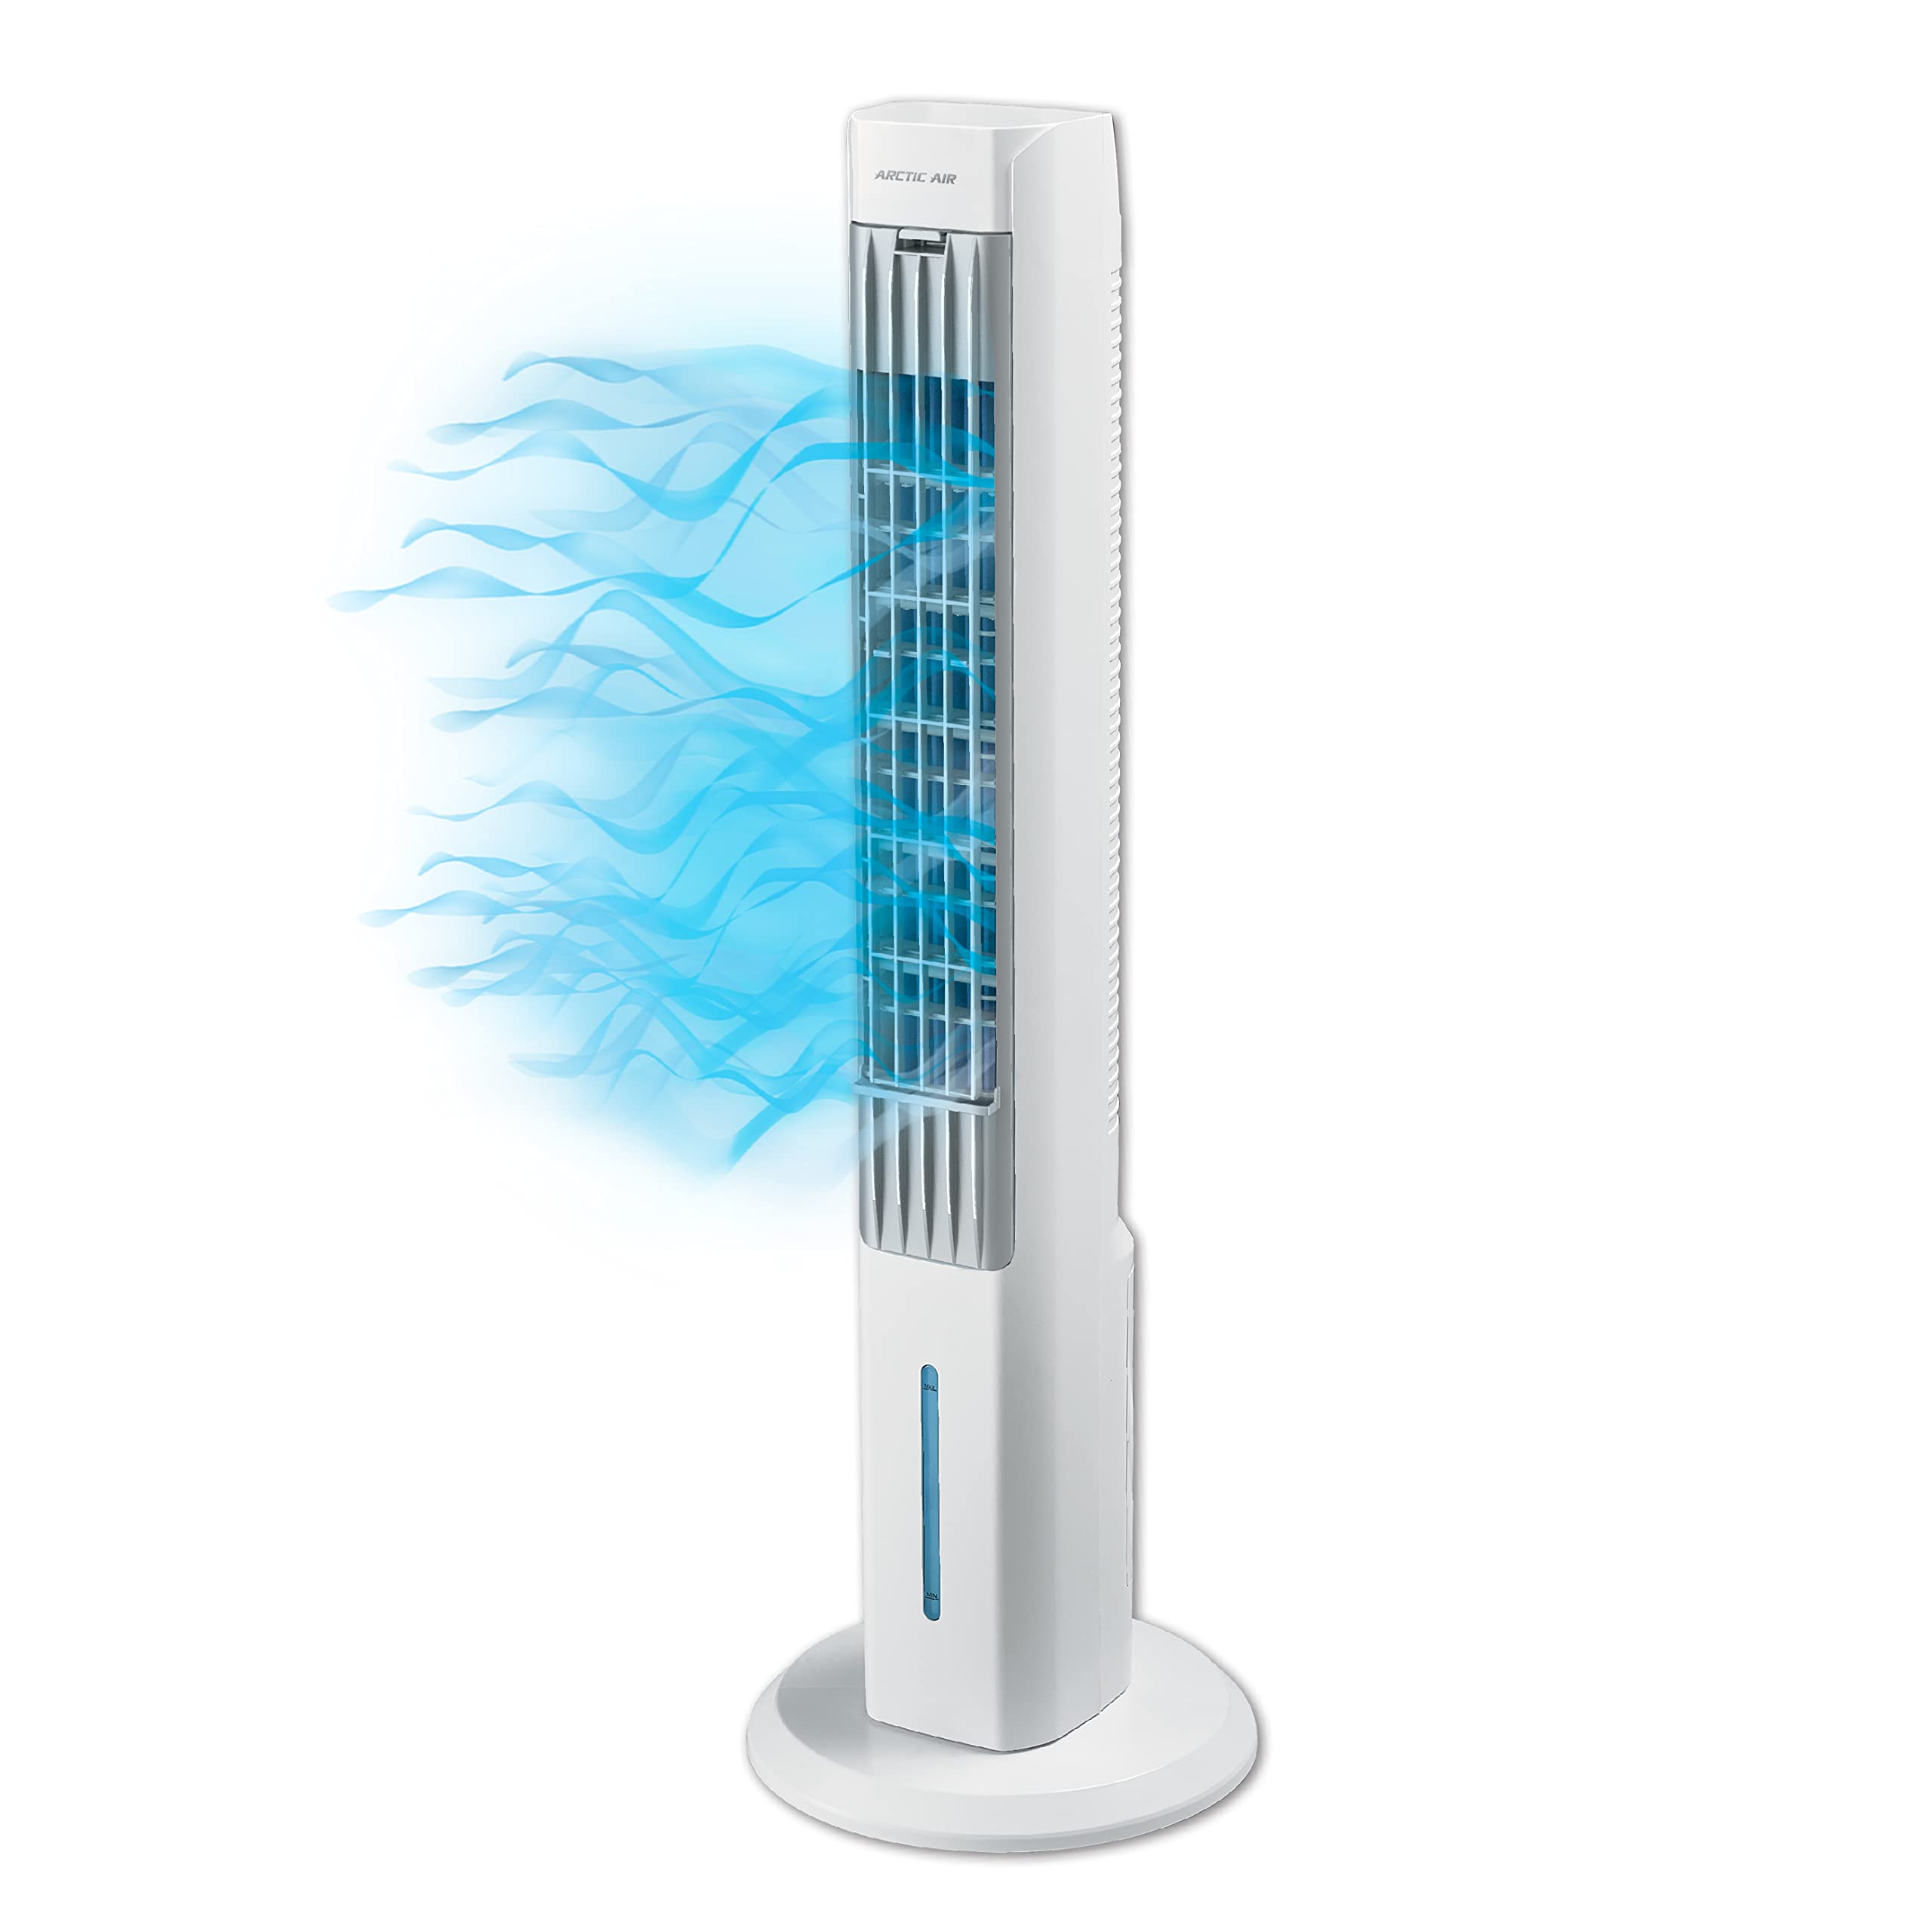 Arctic Air Tower+ Indoor Evaporative Cooler with Oscillating and Quiet Fan Function, Auto-Off Timer, 4 Fan Speeds, LED Night Light, 16-Hour Cooling, Fan for Bedroom, Living Room, Office & More,White